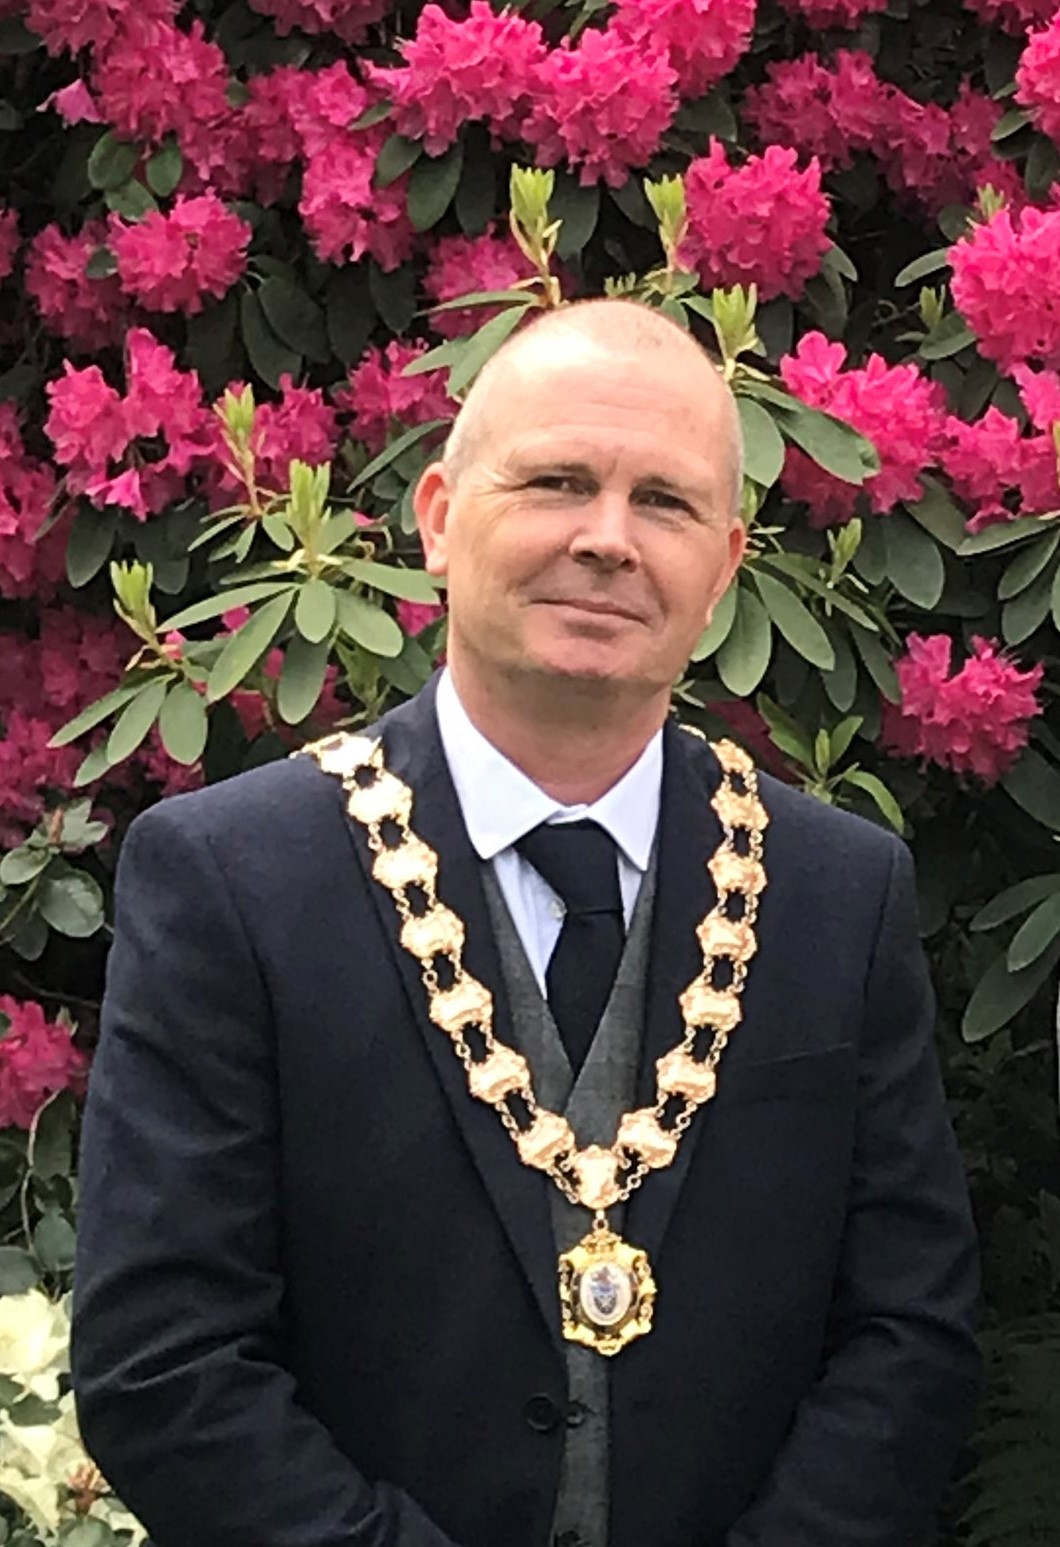 Photo of The Mayor of Knutsford wearing his chains